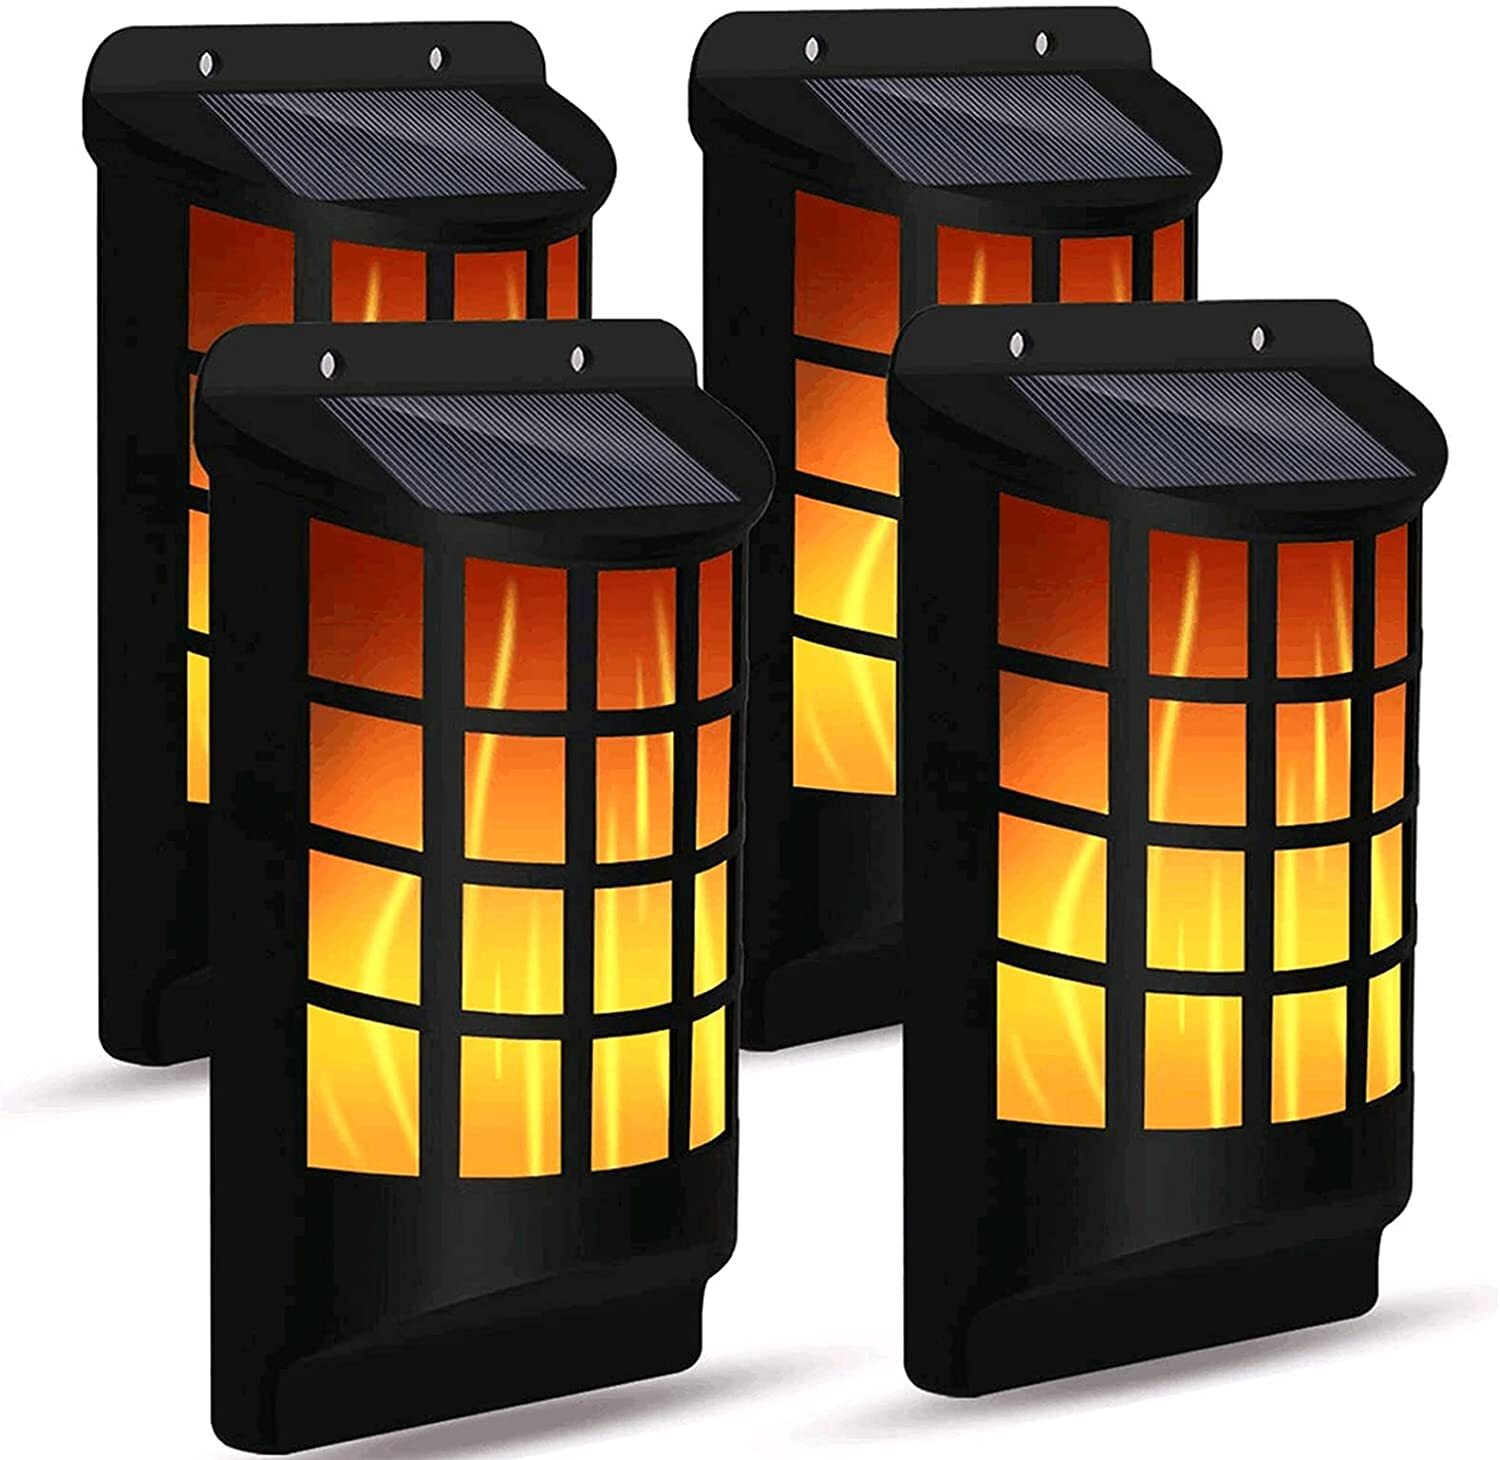 Sconce style outdoor fire lamp